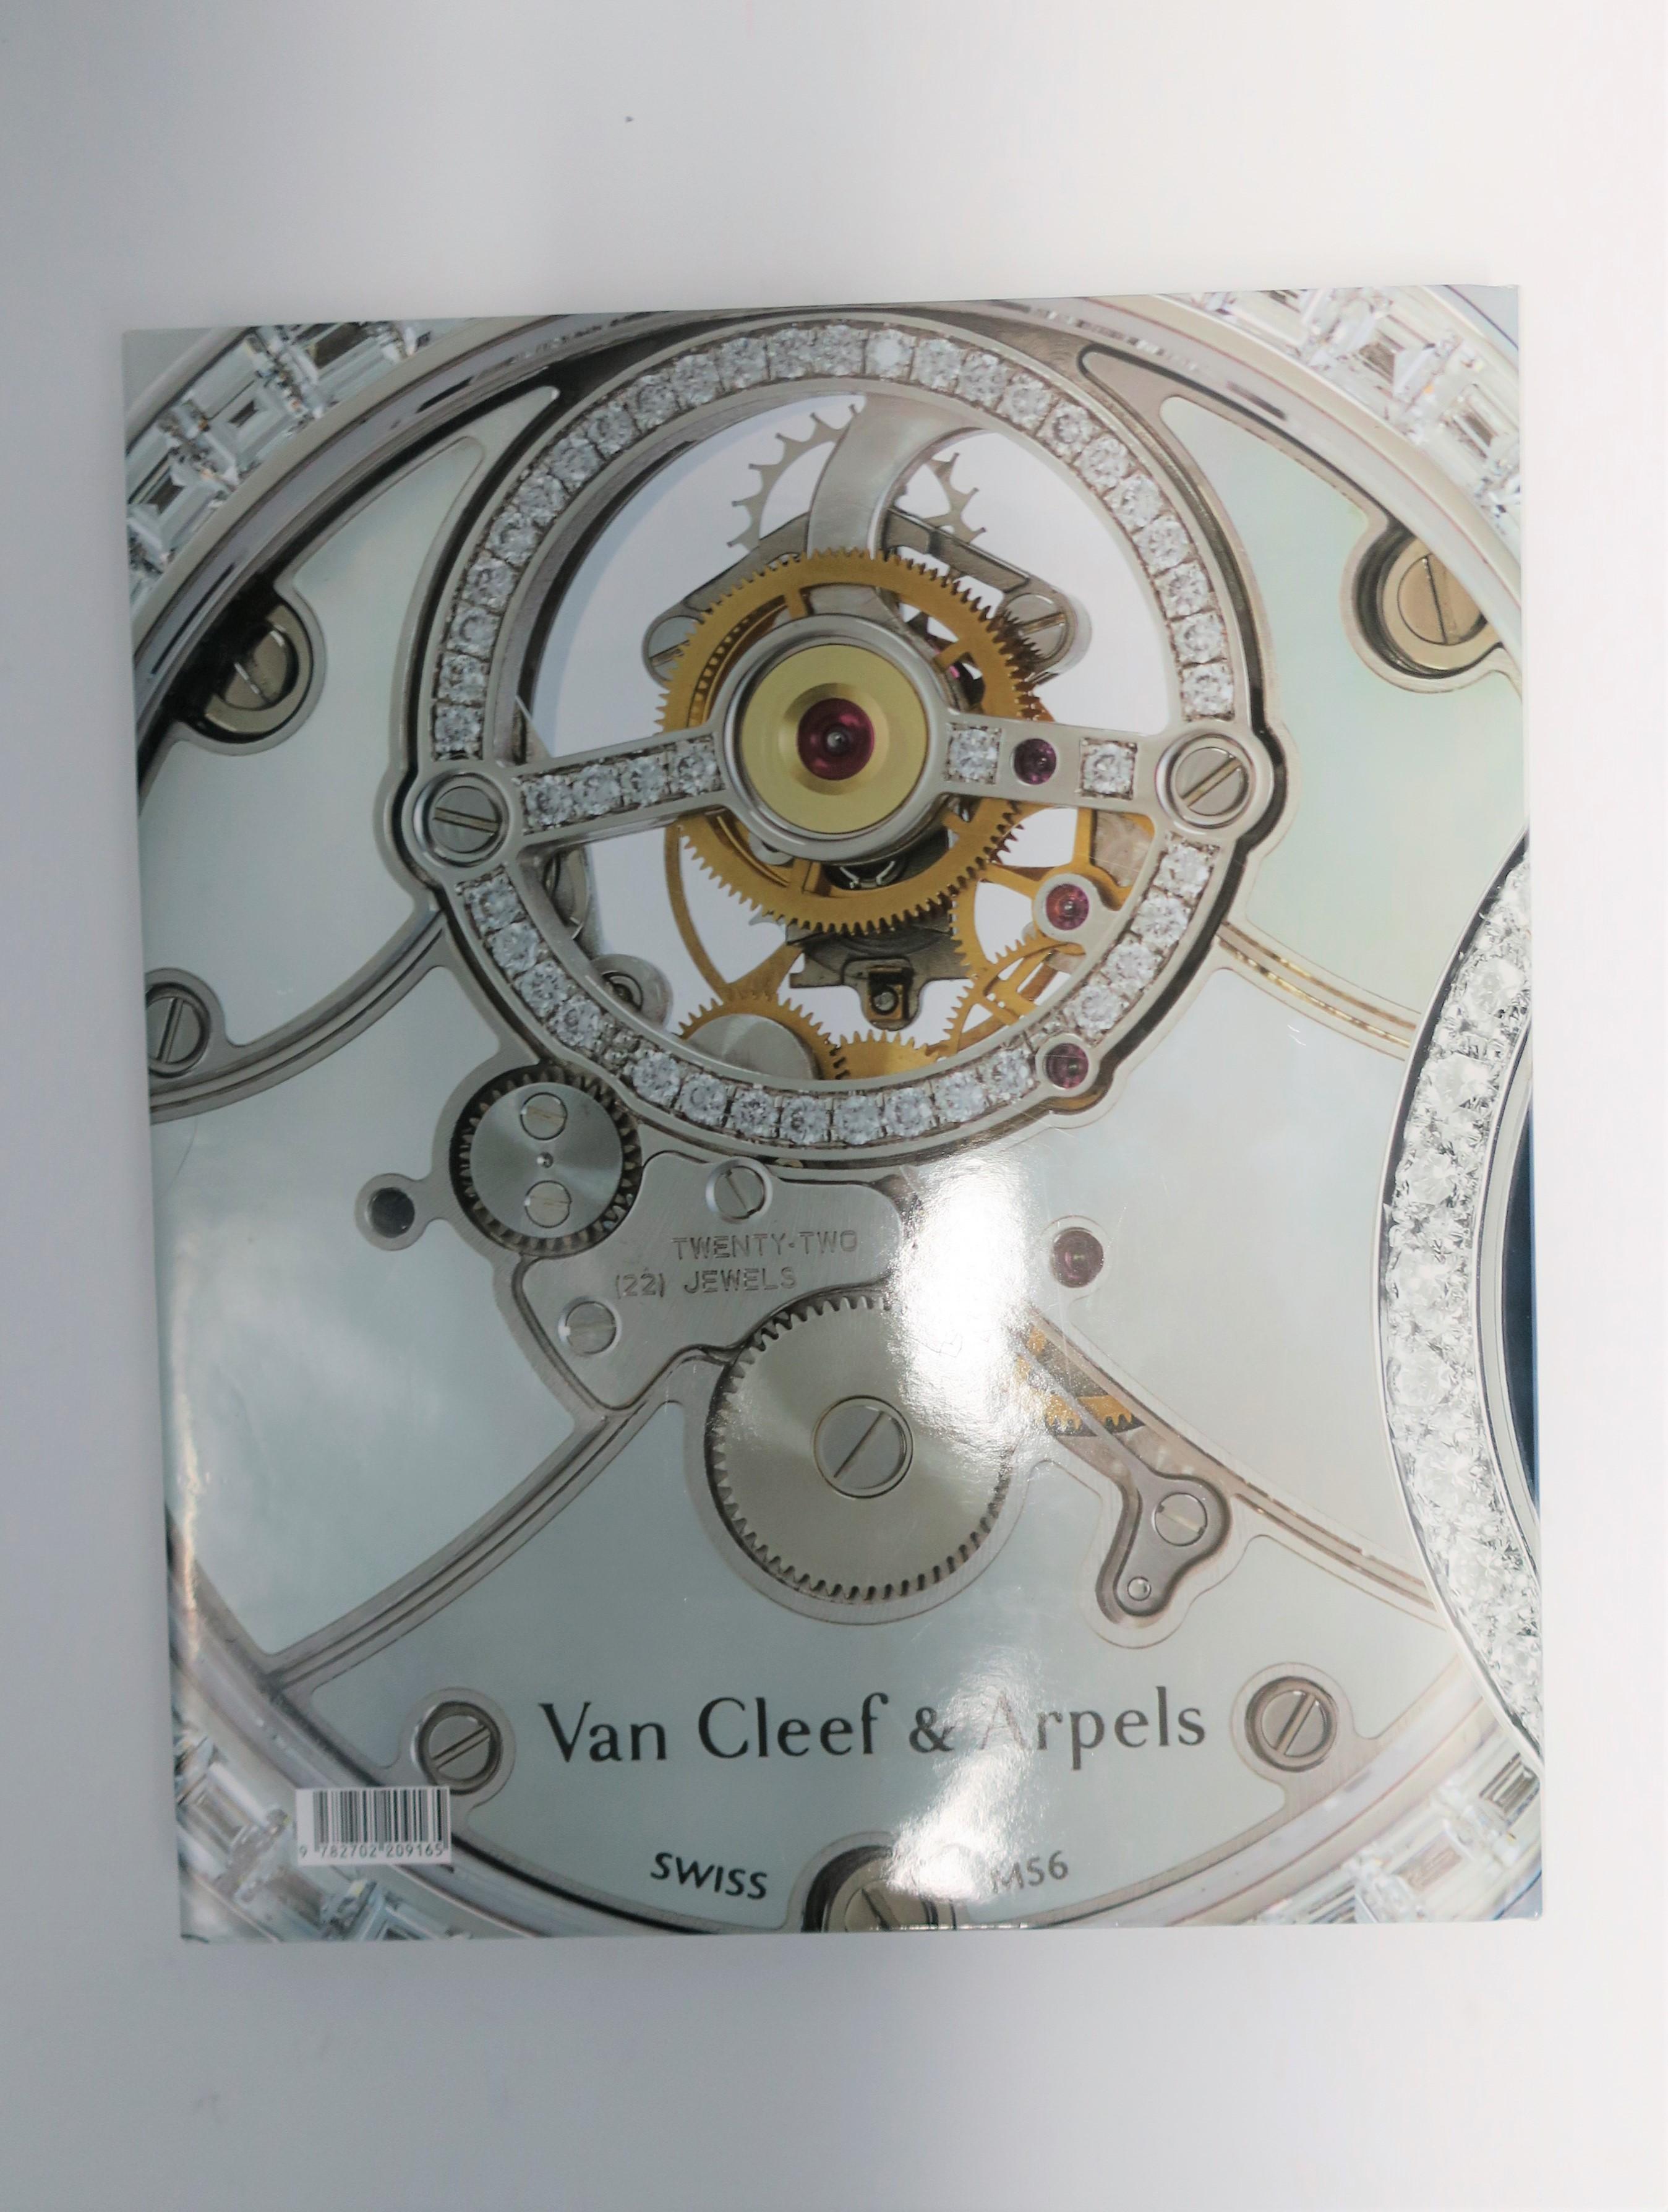 Van Cleef & Arpels, The Poetry of Time, Coffee Table or Library Book 10